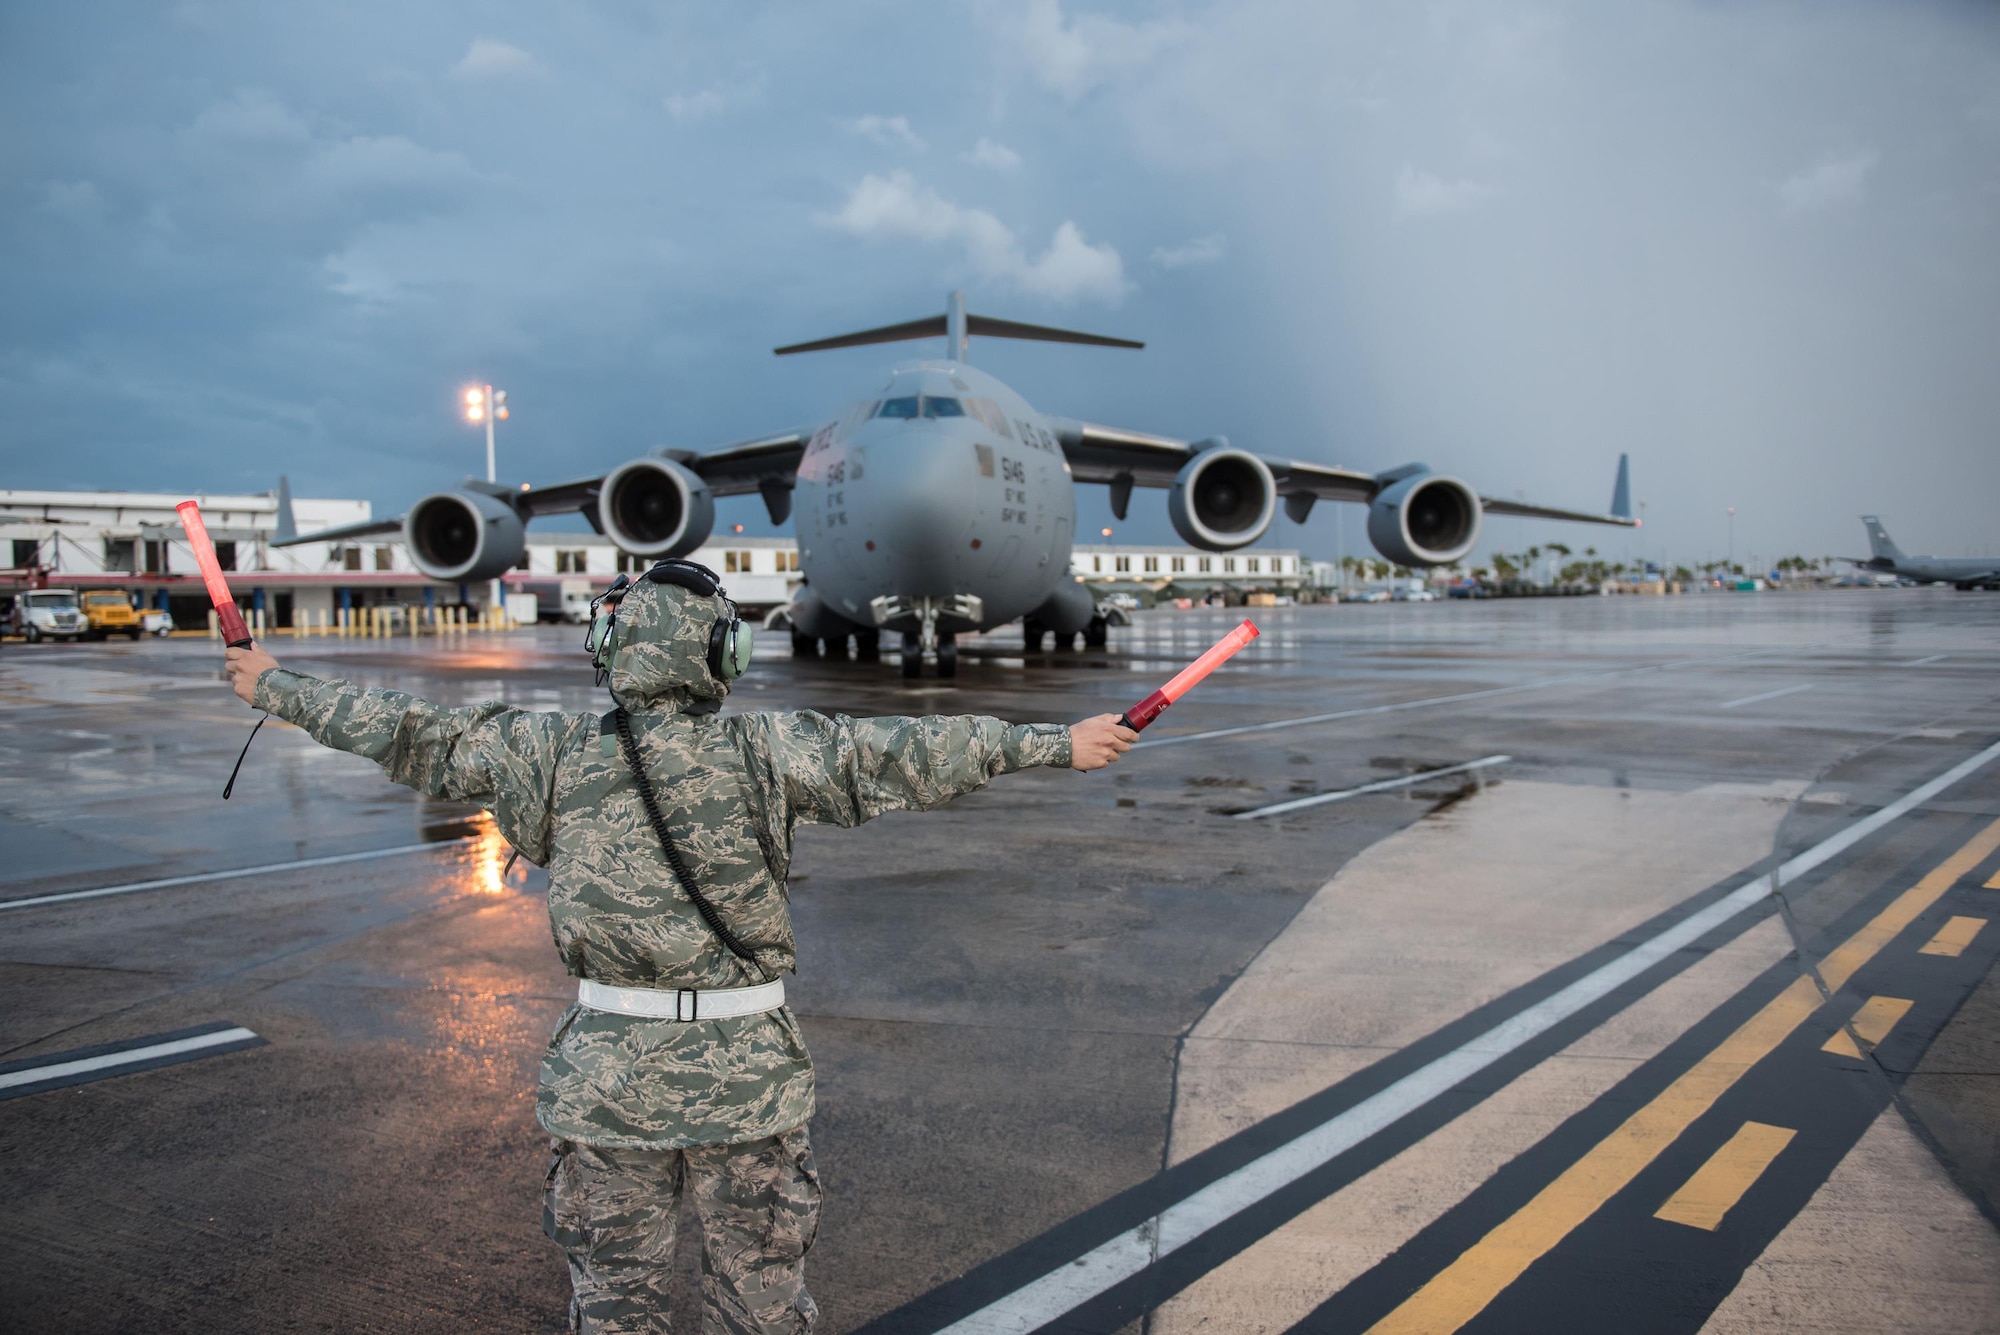 An Airman from the Kentucky Air National Guard’s 123rd Contingency Response Group parks a U.S. Air Force C-17 Globemaster III at Luis Muñoz Marín International Airport in San Juan, Puerto Rico, on Oct. 6, 2017. The aircraft is carrying relief supplies to assist with recovery efforts following Hurricane Maria. (U.S. Air National Guard photo by Lt. Col. Dale Greer)